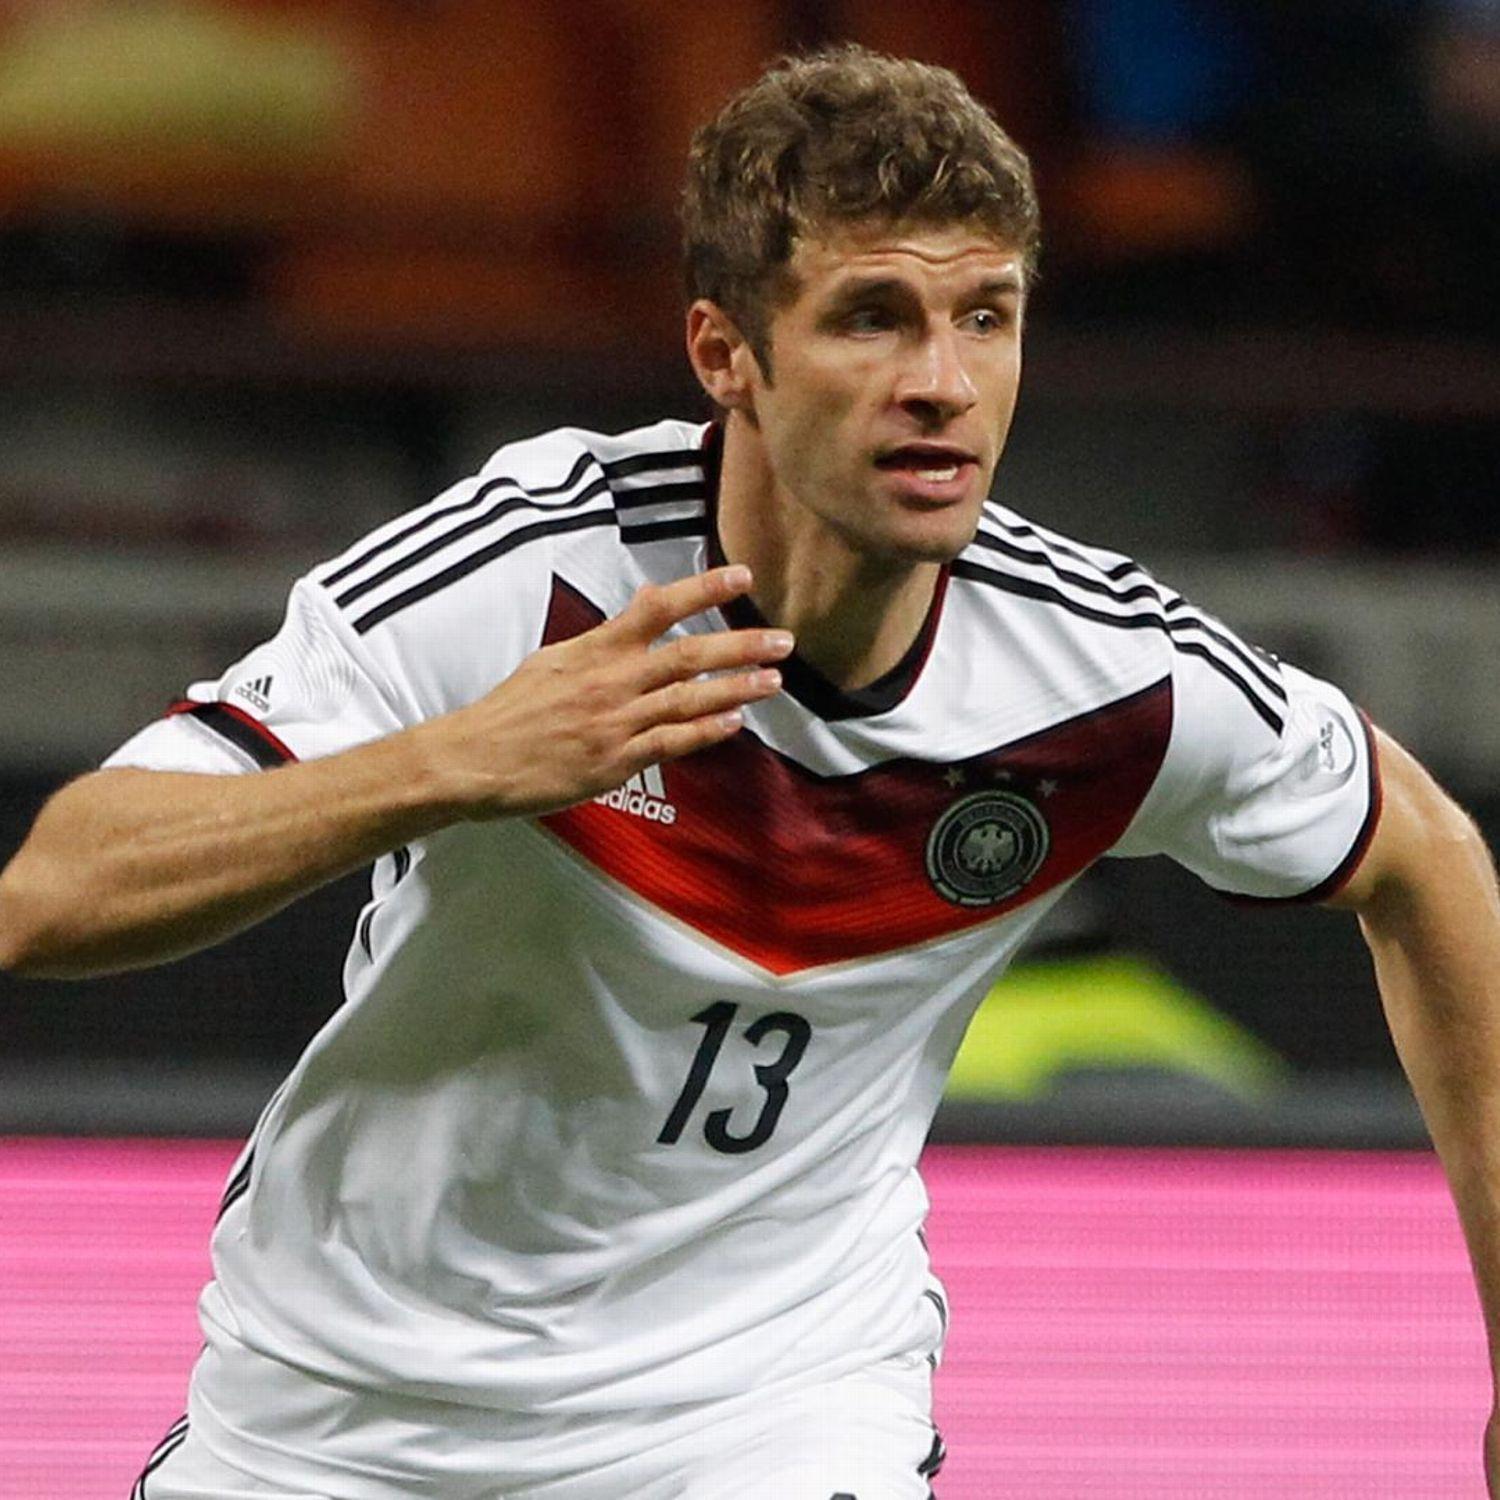 Thomas Muller Hatrick 2014 Fifa World Cup. Brazil World Cup 2014